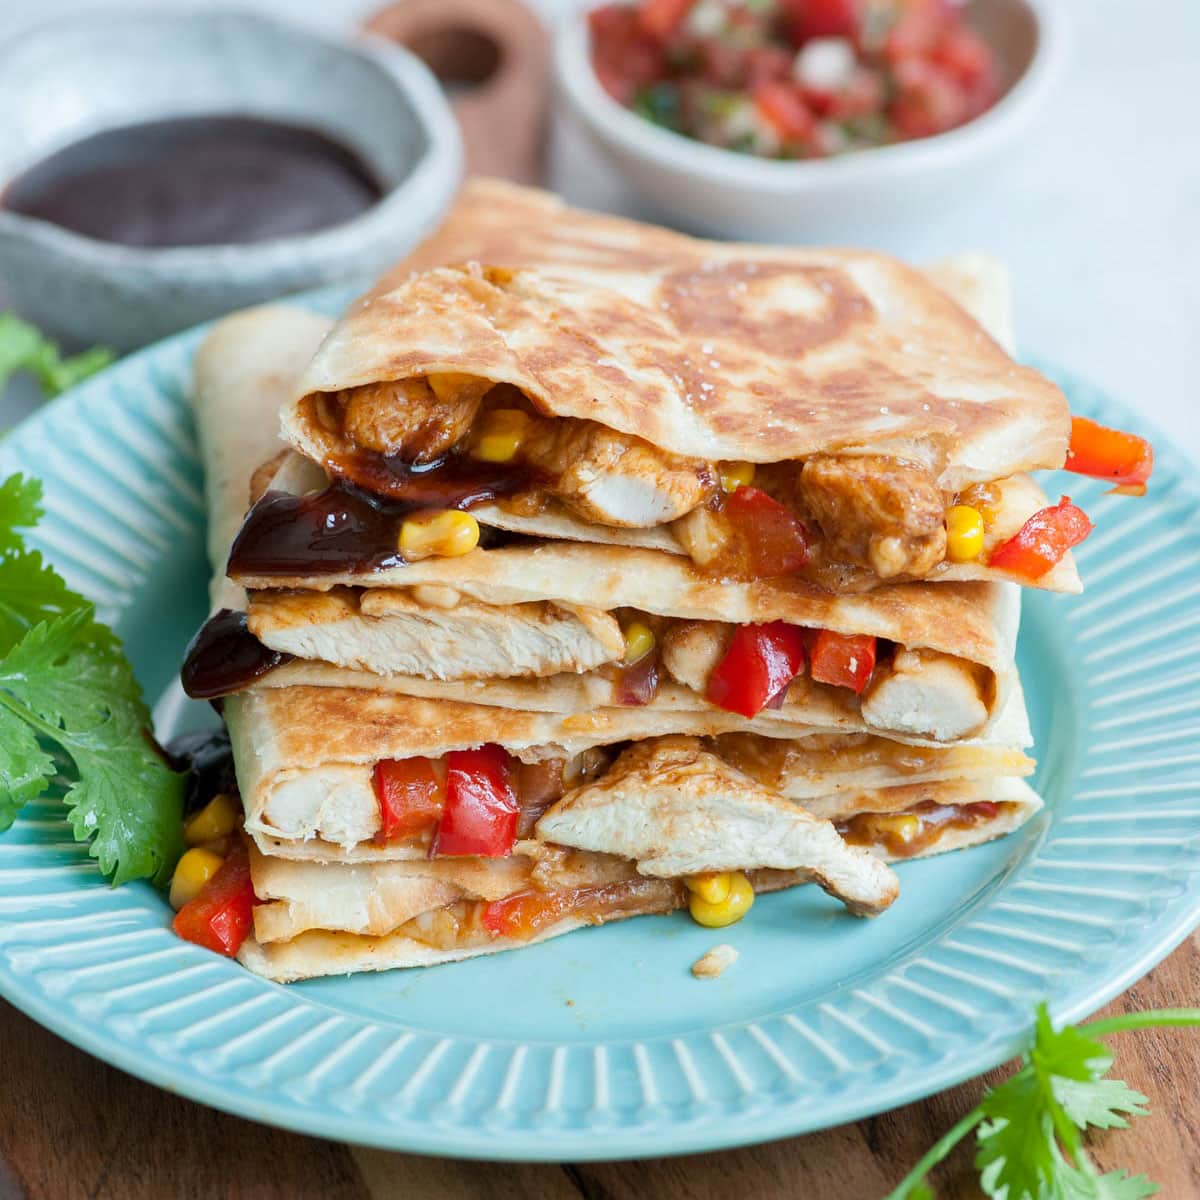 BBQ chicken quesadillas on a blue plate.